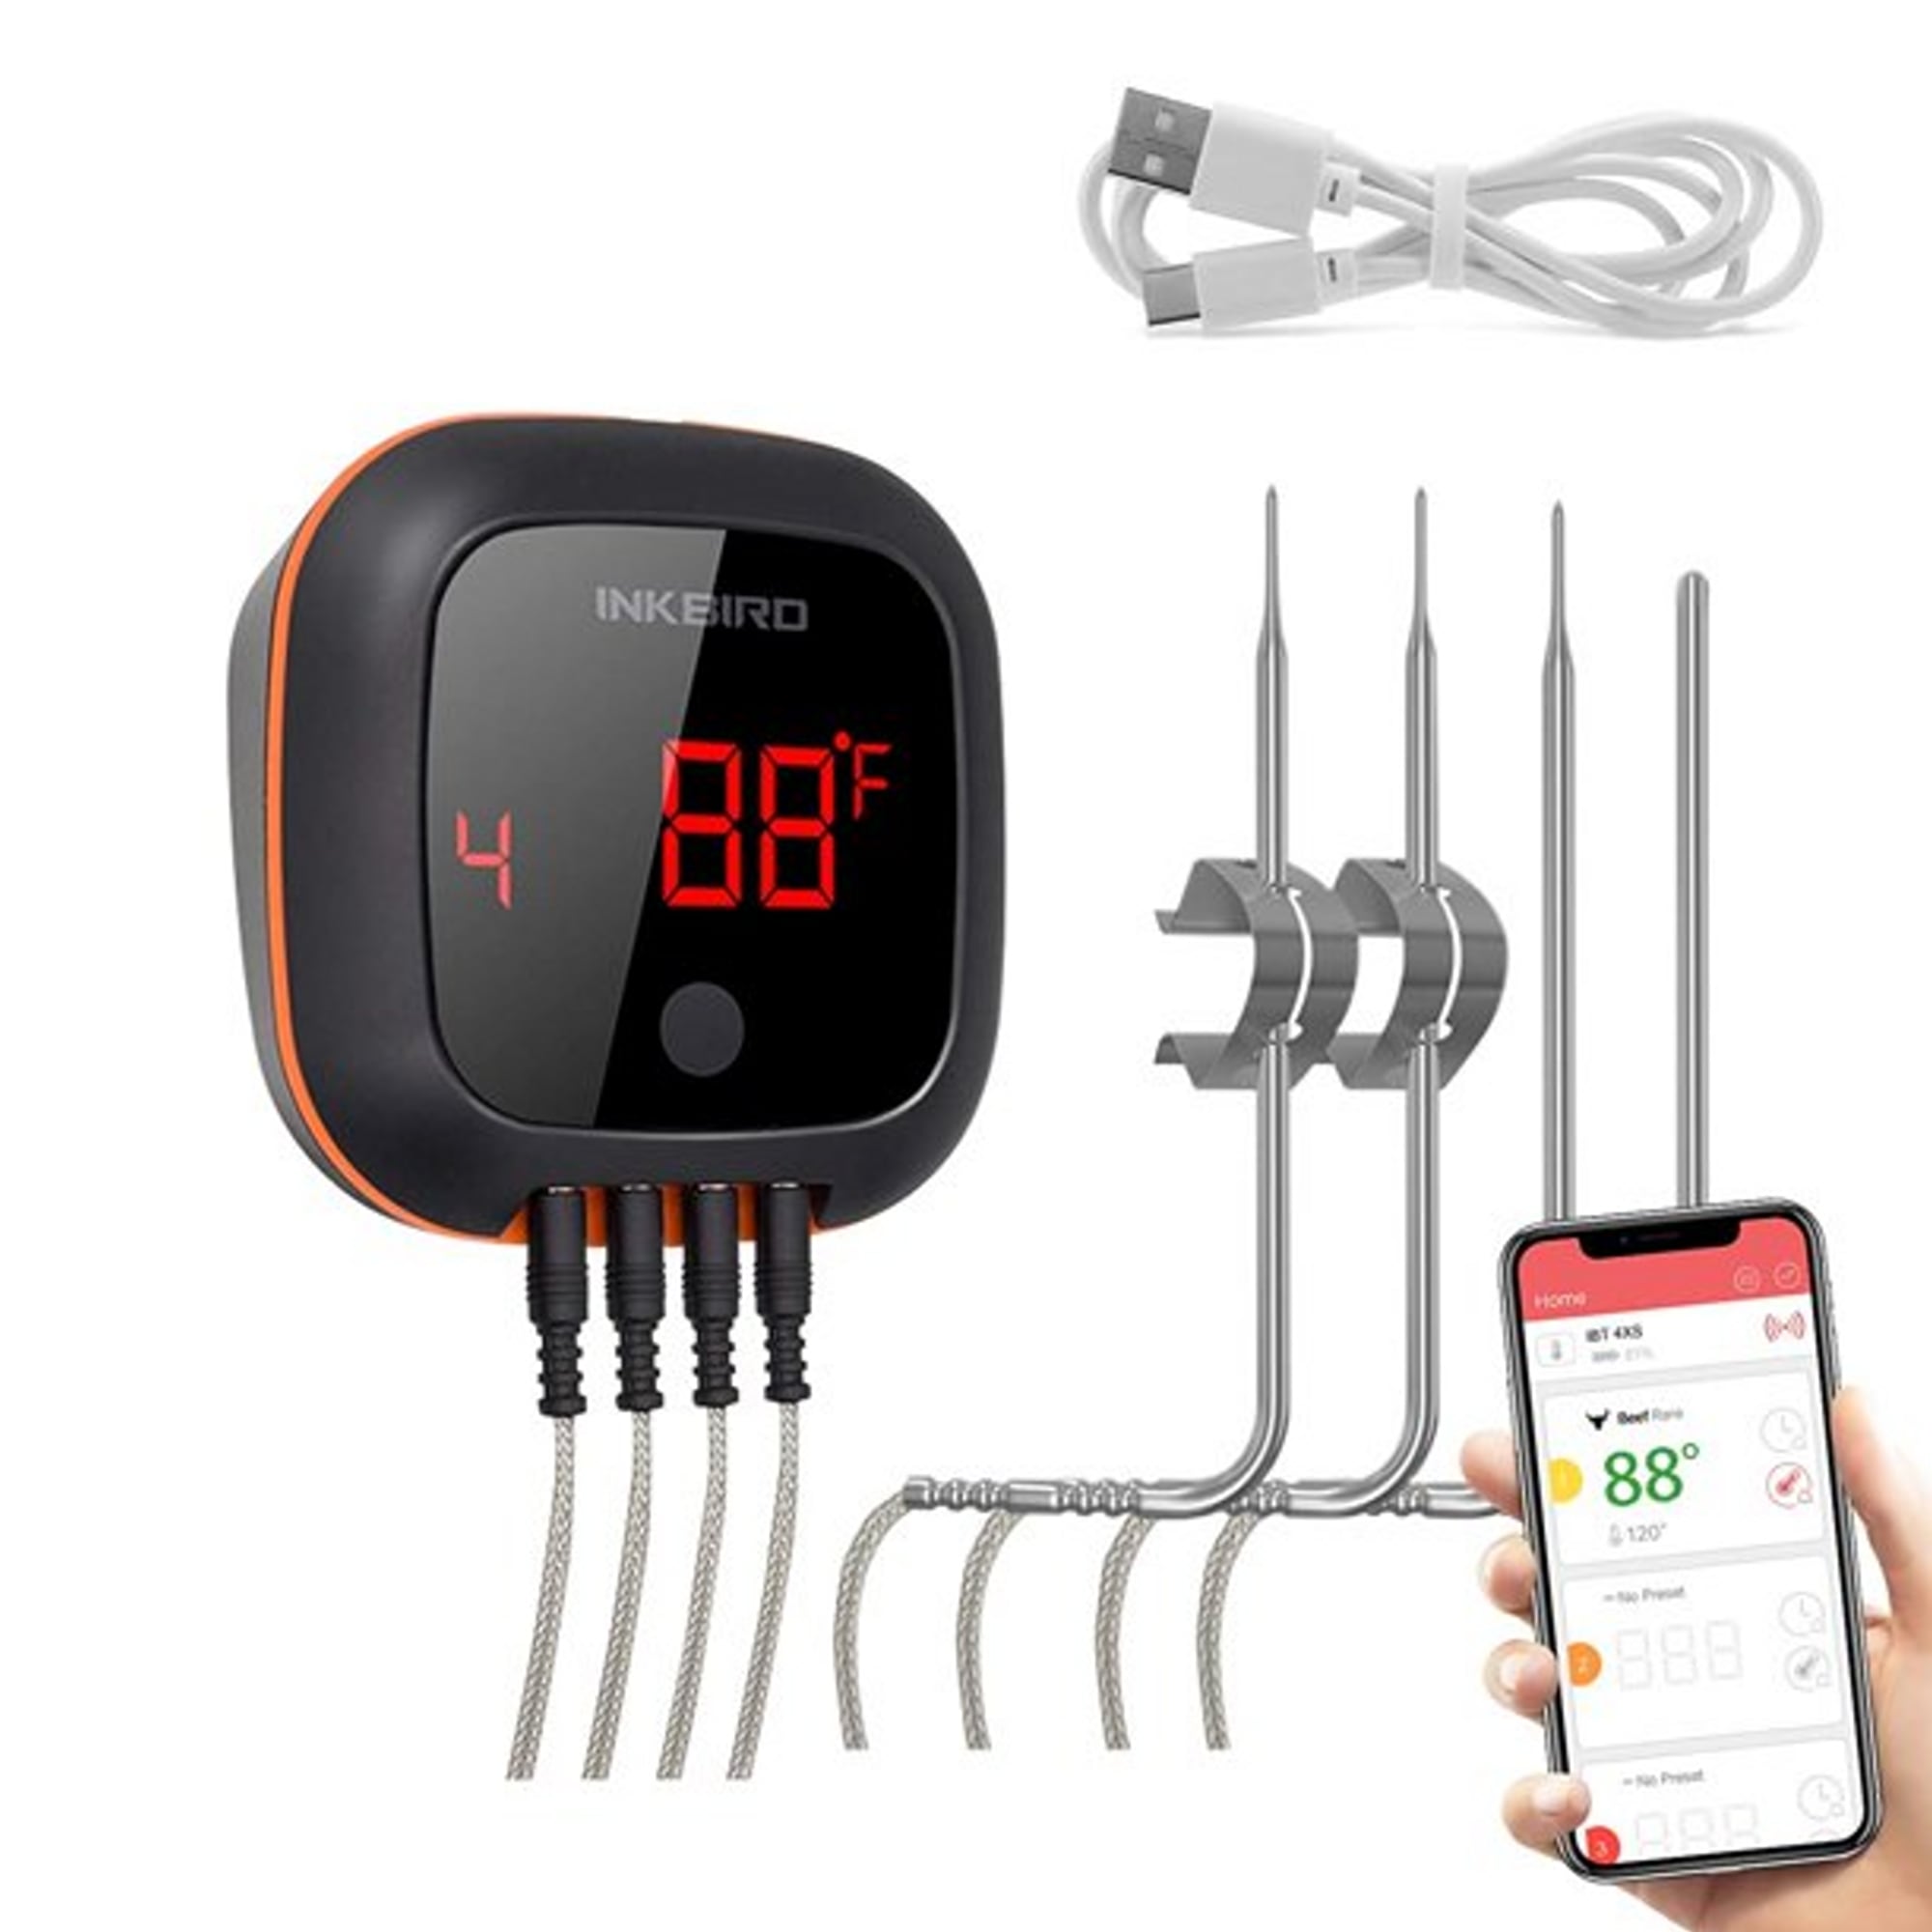 Inkbird WiFi Grill Thermometer, Wireless BBQ Thermometer for Grilling  Roasting Cooking Smart Digital Remote Meat Thermometer with Graph Alarm  Timer 4